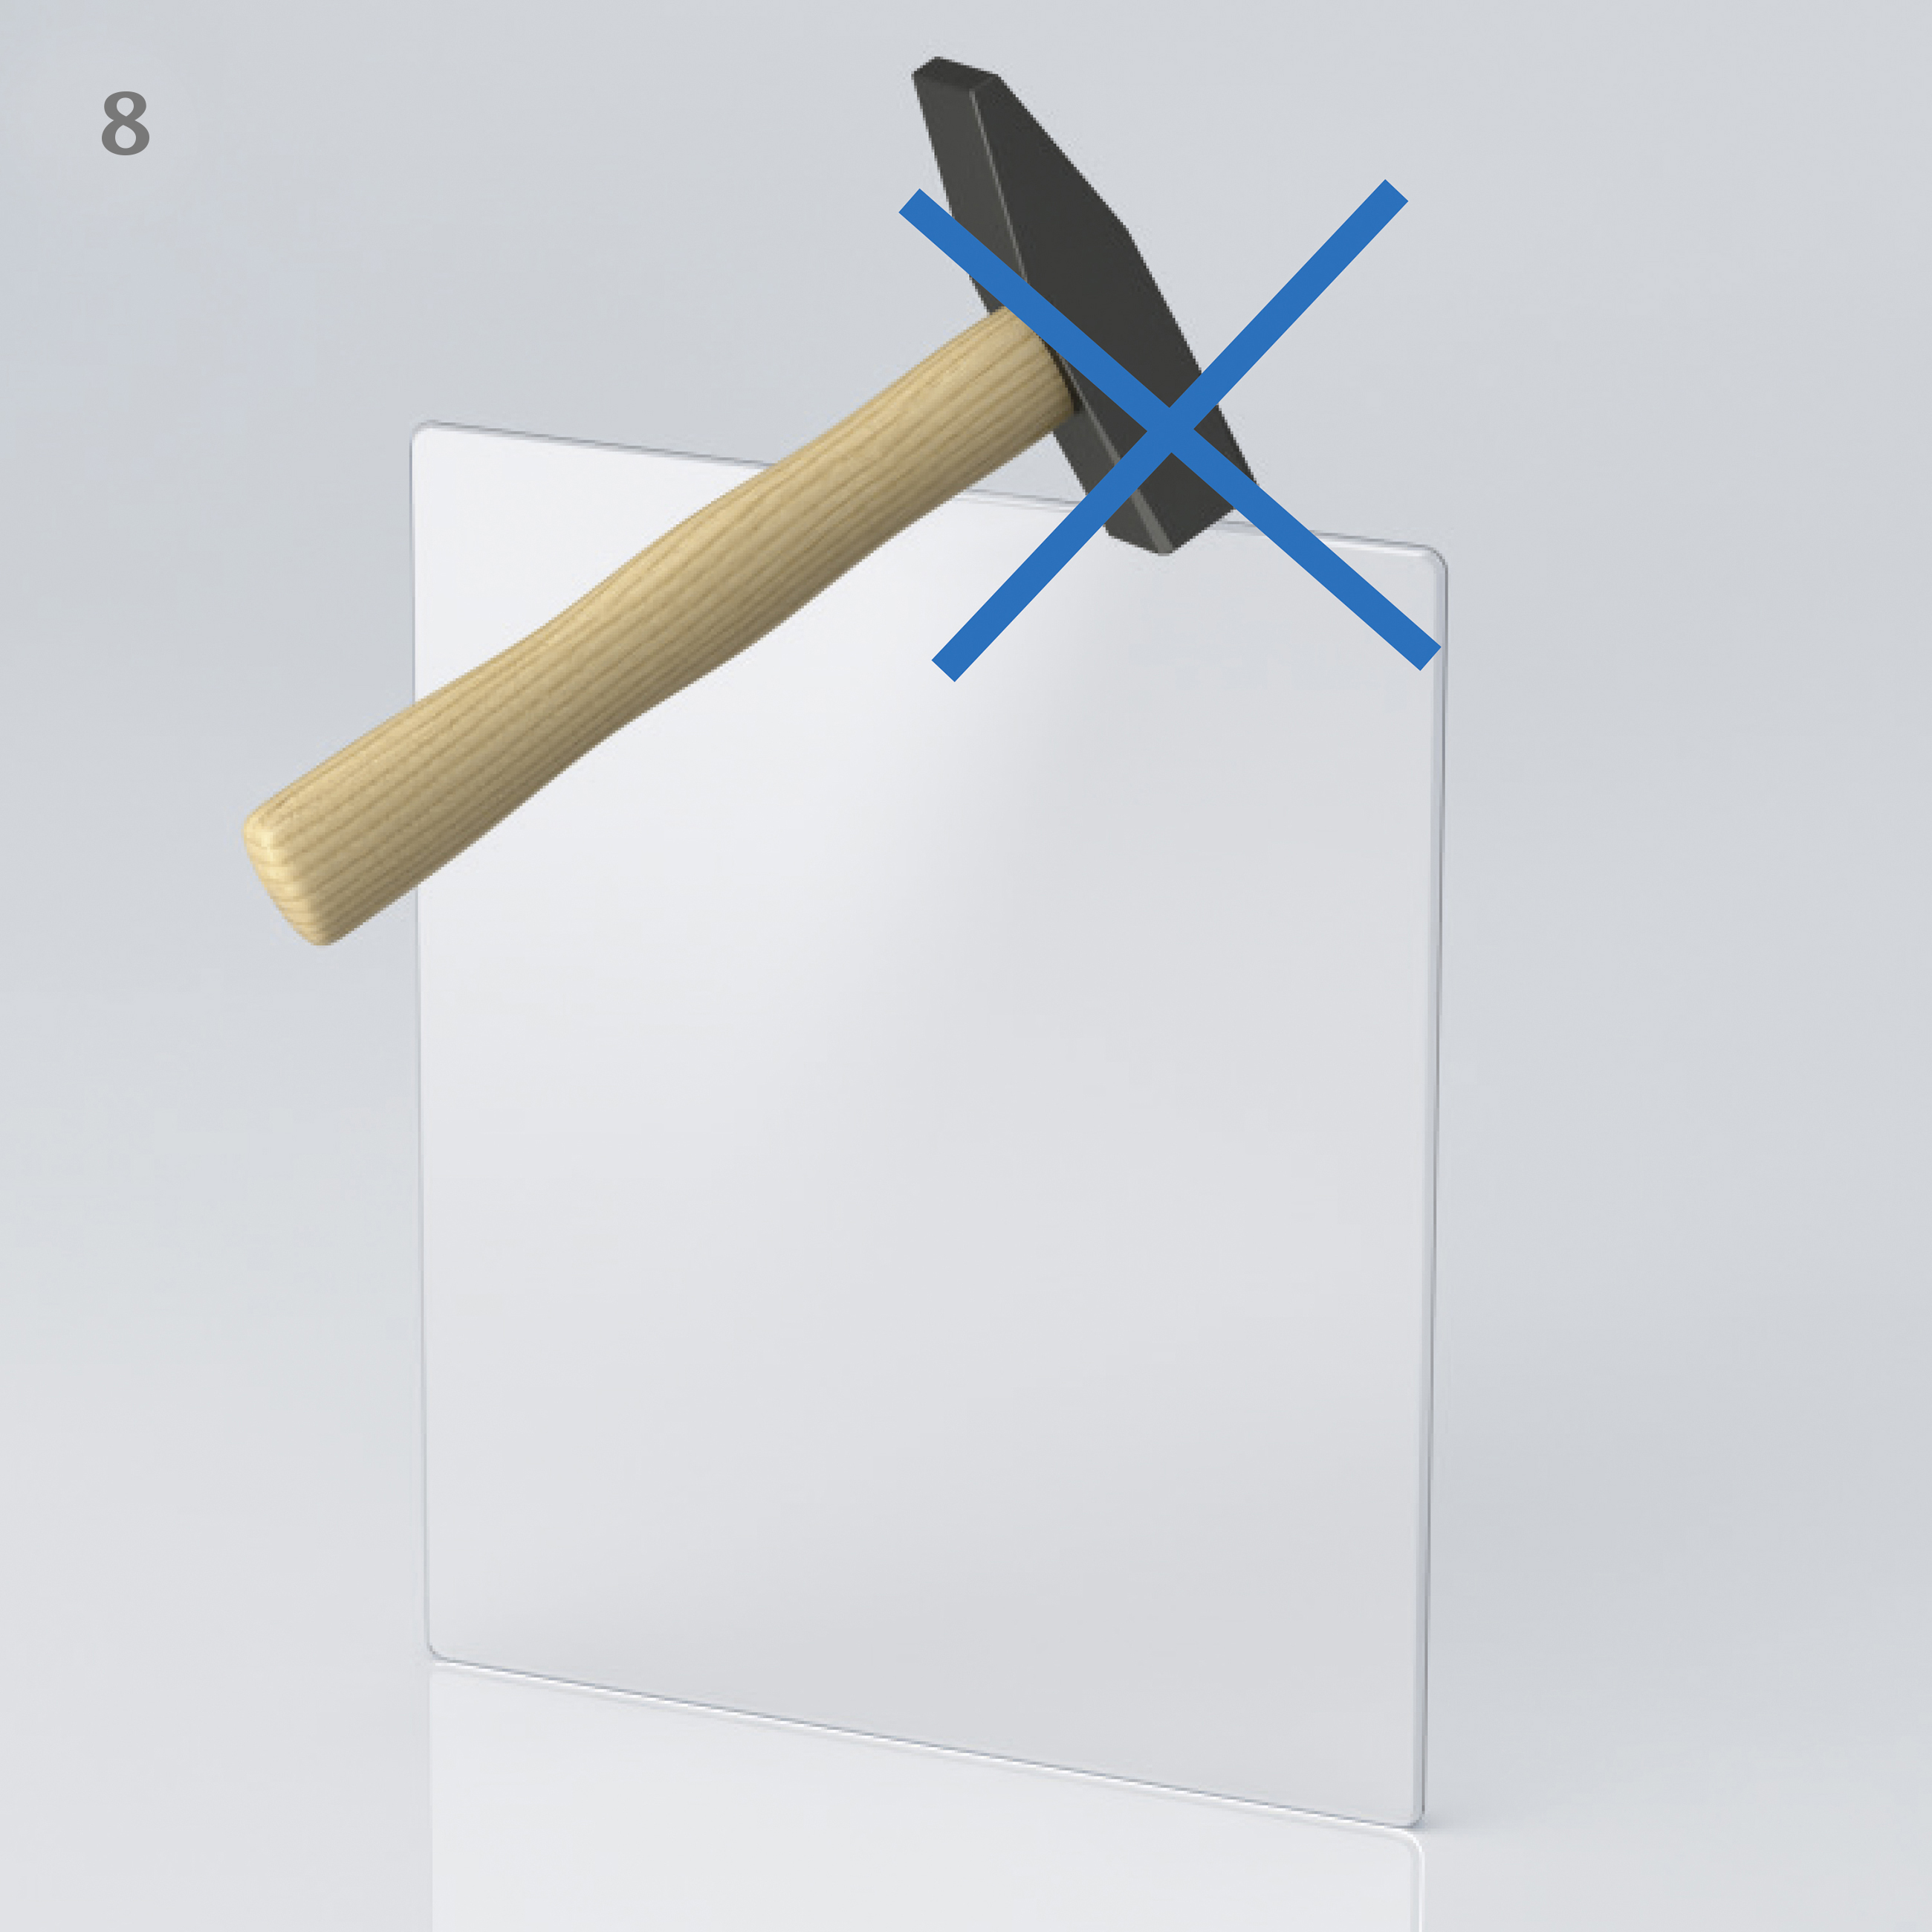 Illustration of a hammer hitting the side of a glass panel